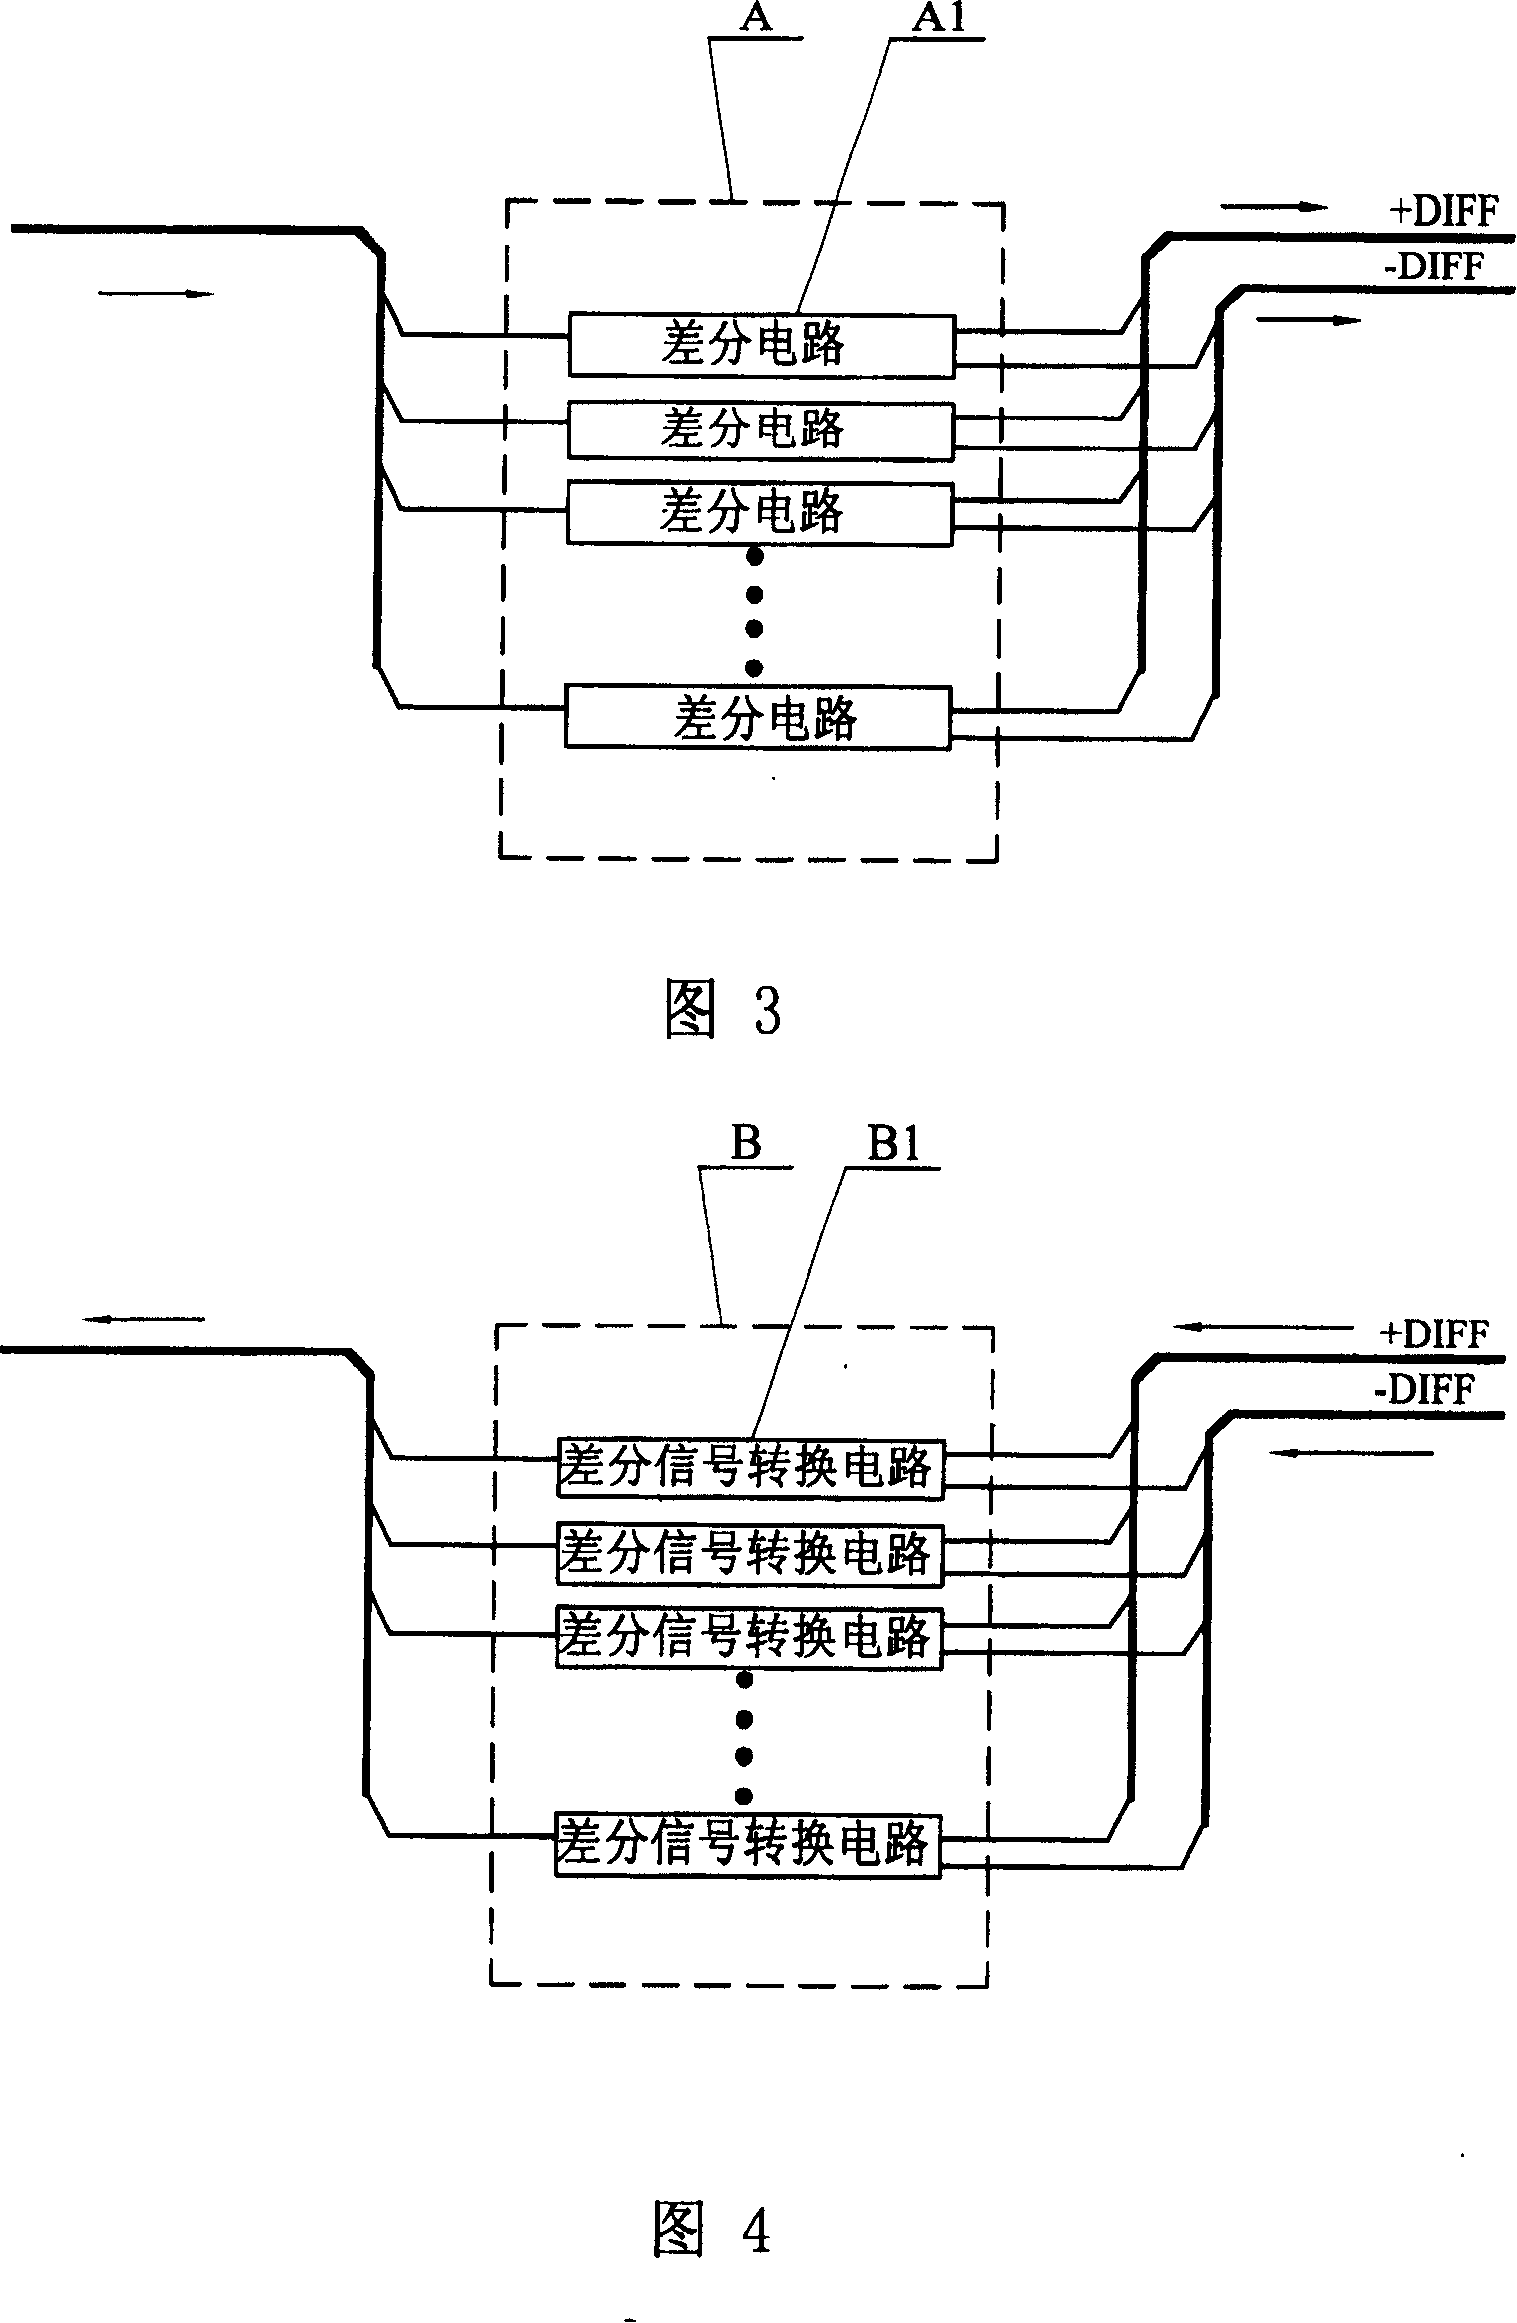 Parallel and serial comprehensive bus system and data transmitting method